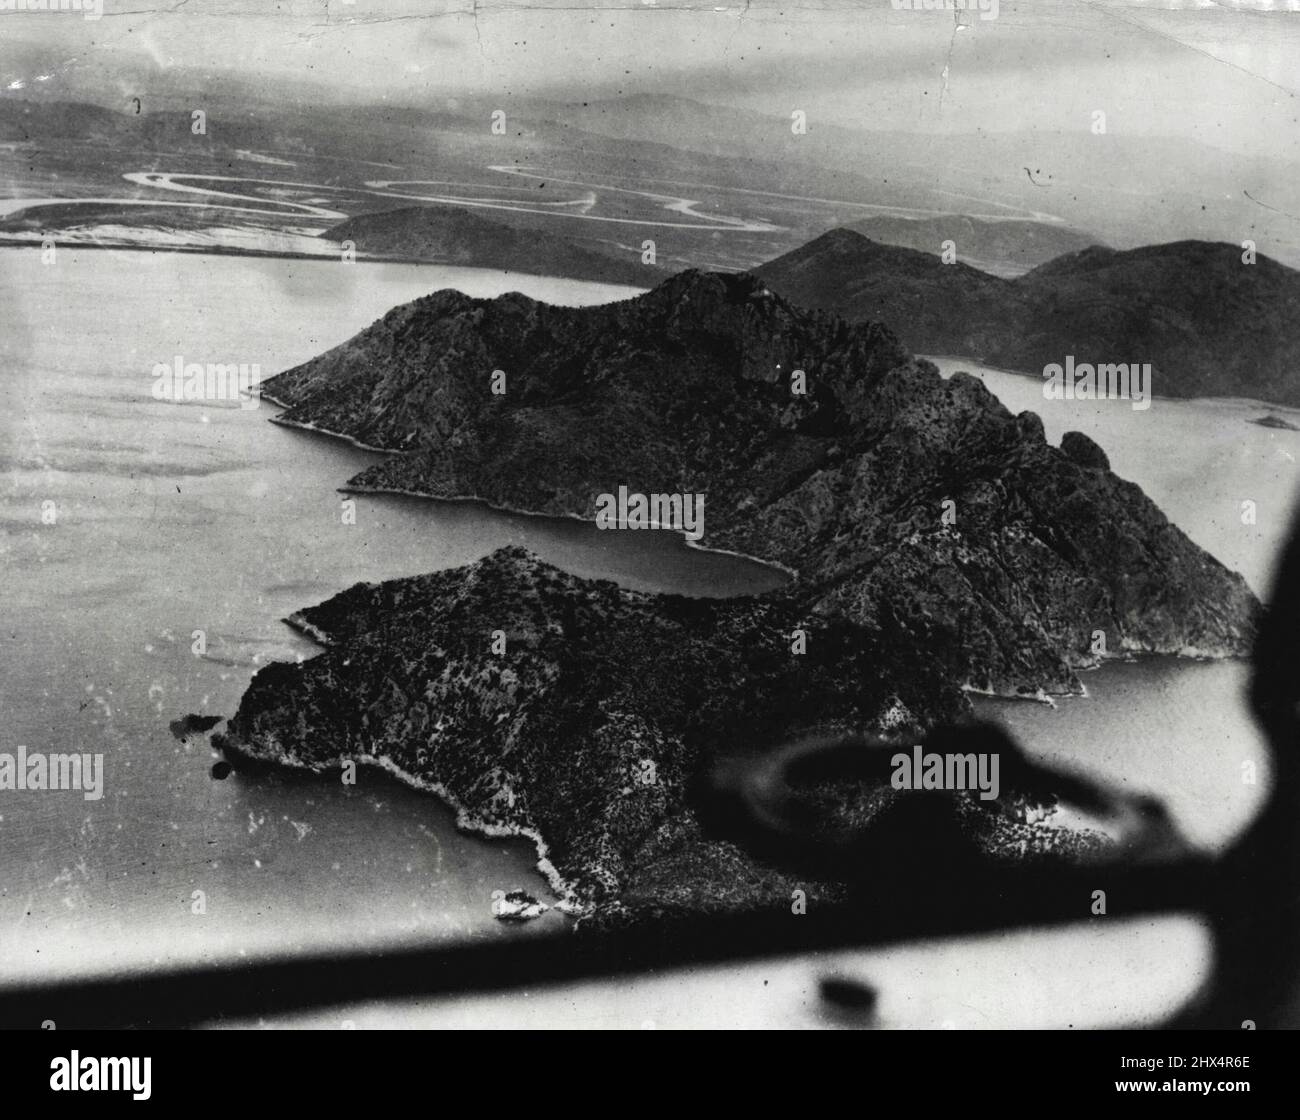 In Flight With The Graf Zeppelin To The Holy Land -- A view of the island of Crete in the Mediterranean, as seen from the Graf Zeppelin in flight from Berlin to the Holy Land. This is one of the pictures made by Robert Hartman staff photographer for the Hearst News Service which produces the MGM News and the International Newsreel. November 04, 1929. (Photo by Robert Hartman, MGM News Photos). Stock Photo